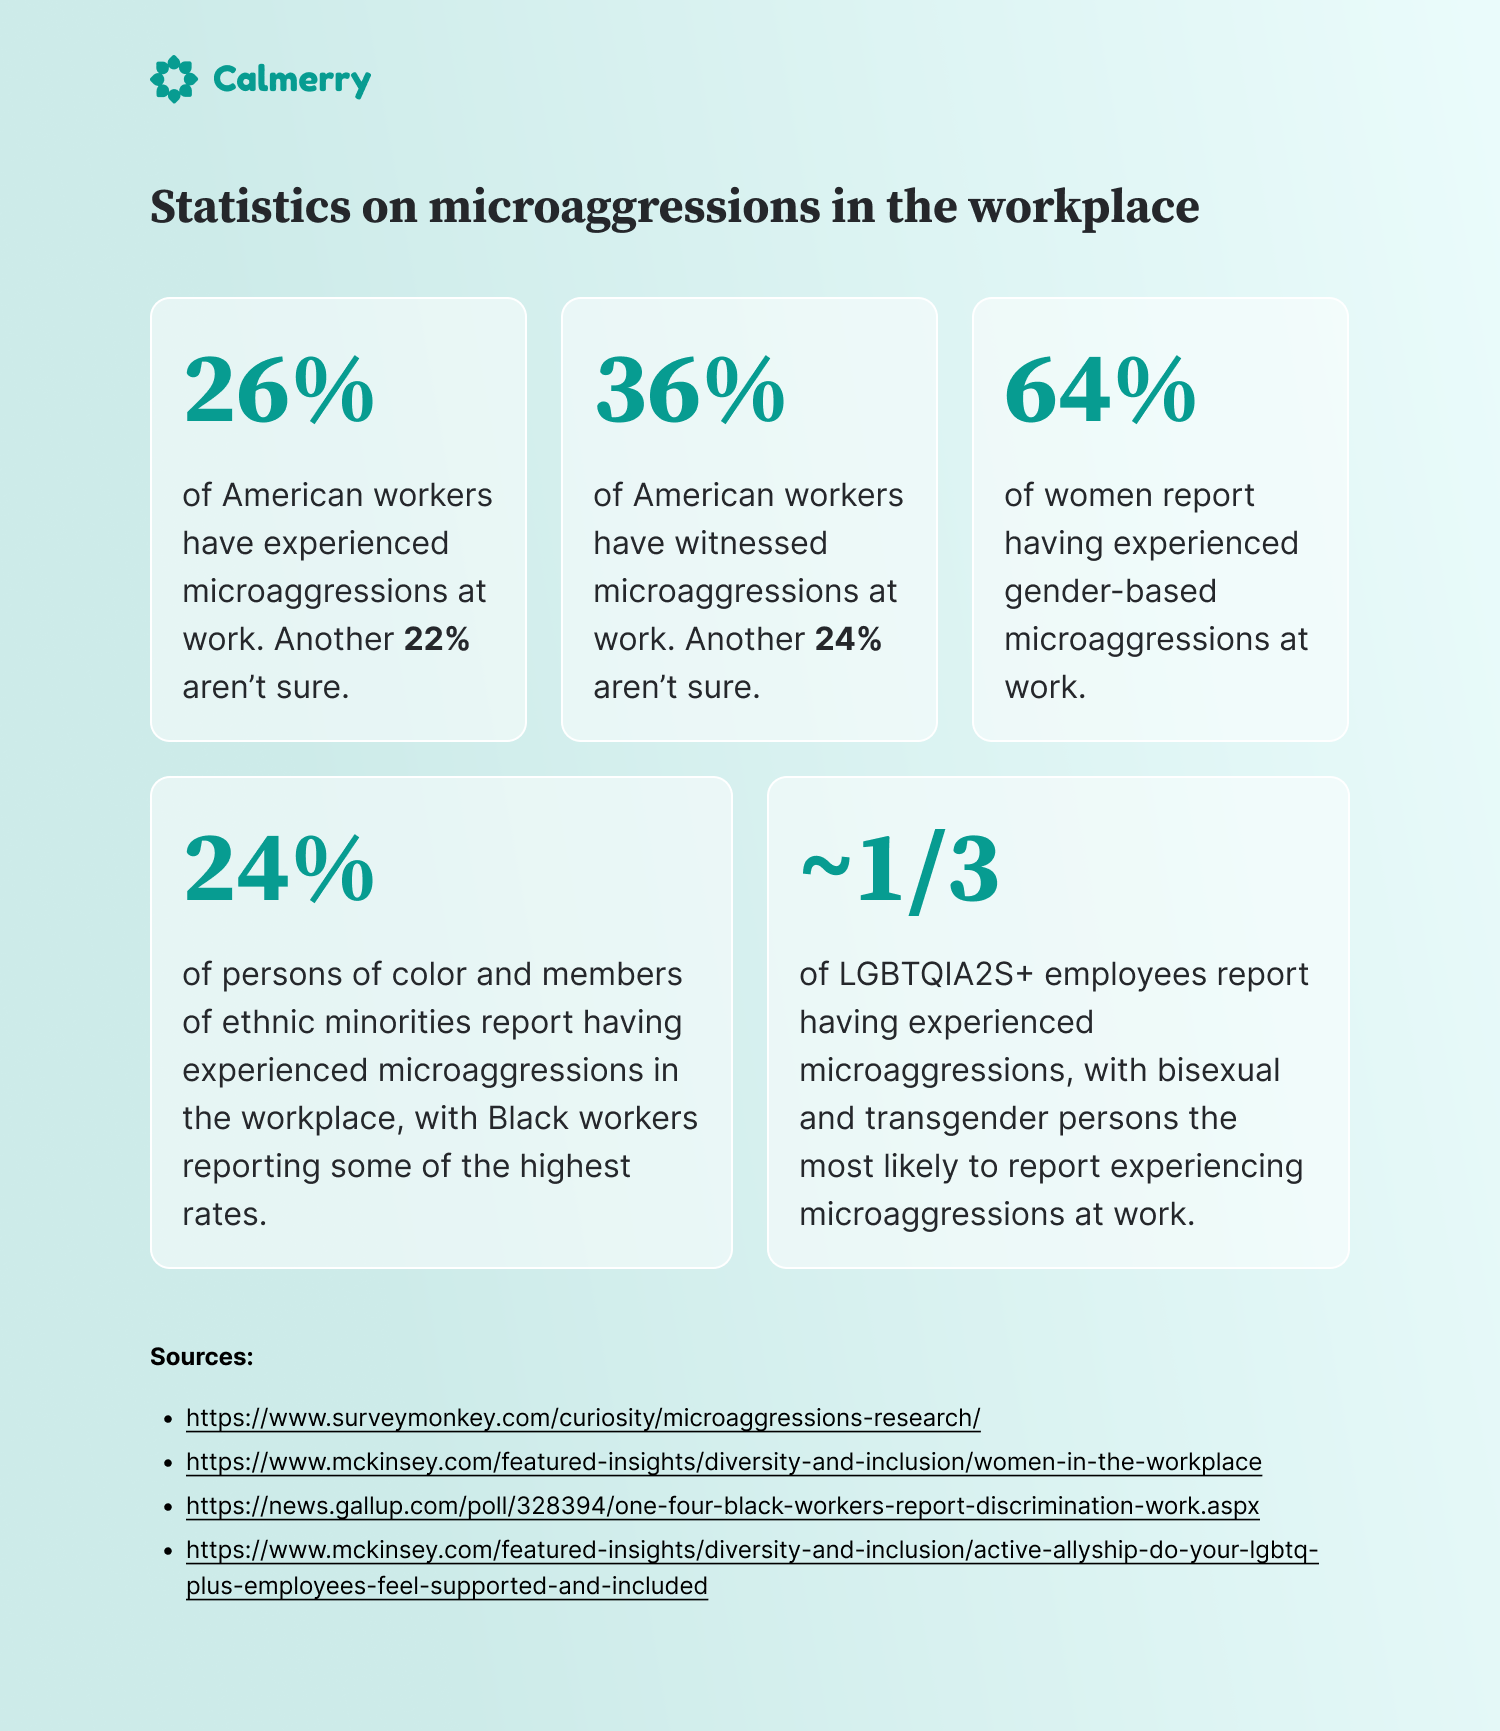 Statistics on microaggressions in the workplace 26% of American workers have experienced microaggressions at work. Another 22% aren’t sure. 36% of American workers have witnessed microaggressions at work. Another 24% aren’t sure. 64% of women report having experienced gender-based microaggressions at work. 24% of persons of color and members of ethnic minorities report having experienced microaggressions in the workplace, with Black workers reporting some of the highest rates. About one-third of LGBTQIA2S+ employees report having experienced microaggressions, with bisexual and transgender persons the most likely to report experiencing microaggressions at work